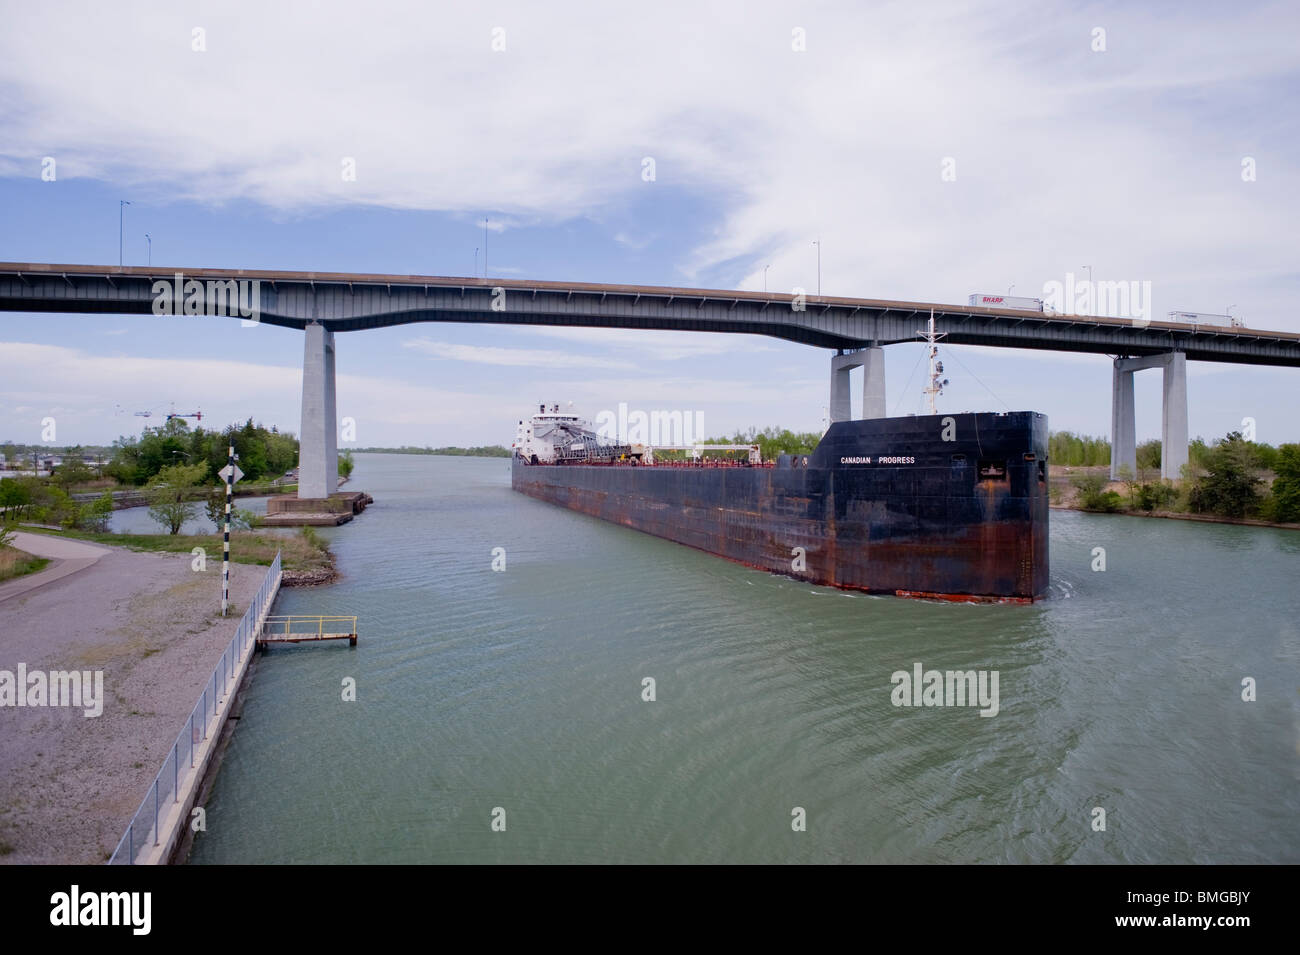 "Laker' style freighter passa sotto il ponte sul canale Welland, St. Catherines, Ontario, Canada. Foto Stock